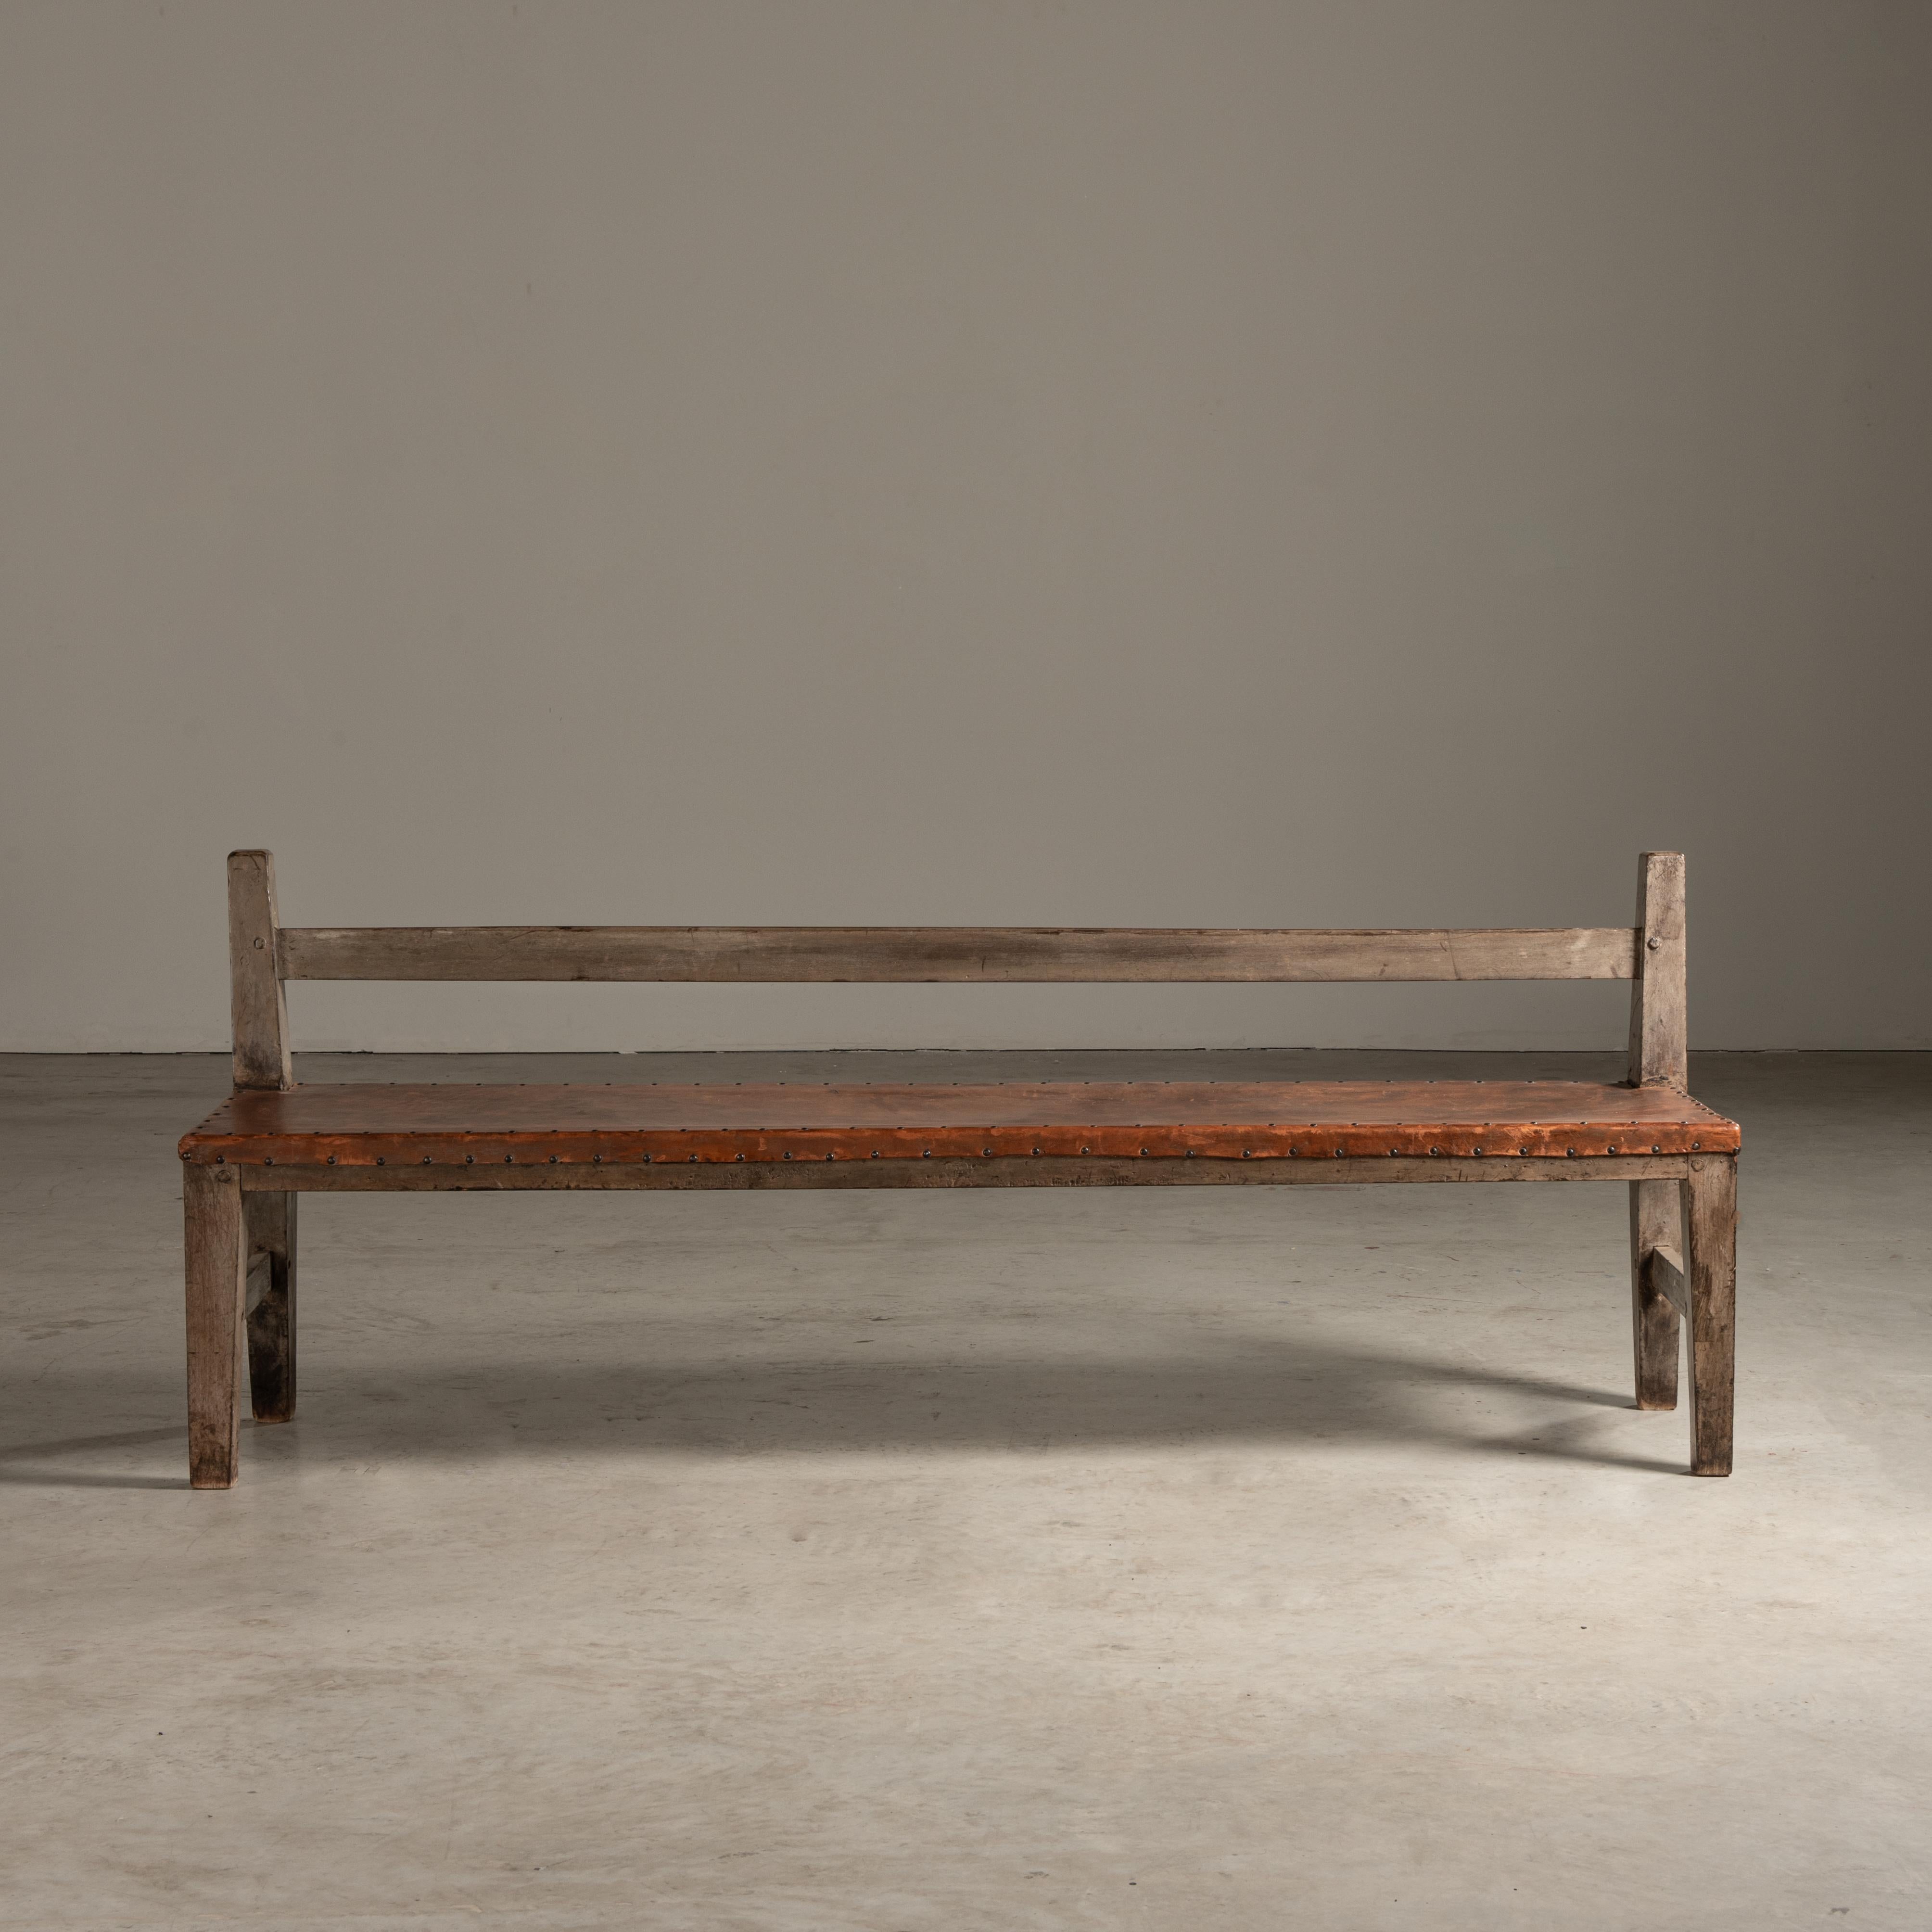 Patinated 19th Century Bench in Solid Wood and Leather, Brazilian Design In Good Condition For Sale In Sao Paulo, SP